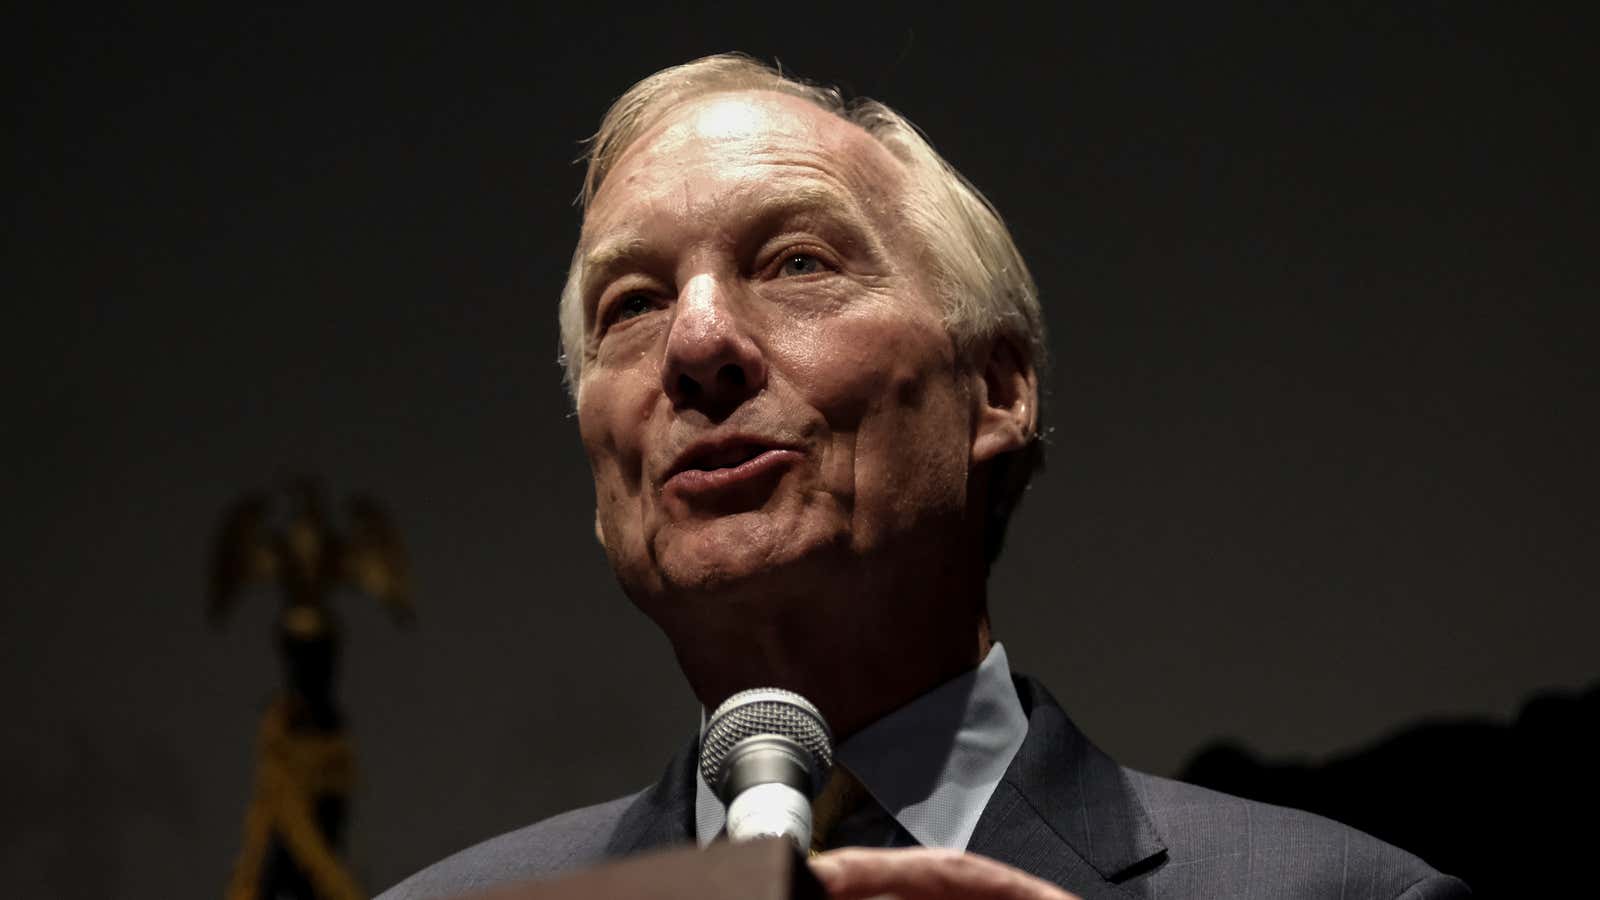 Maryland comptroller Peter Franchot ran for governor but lost the primary.